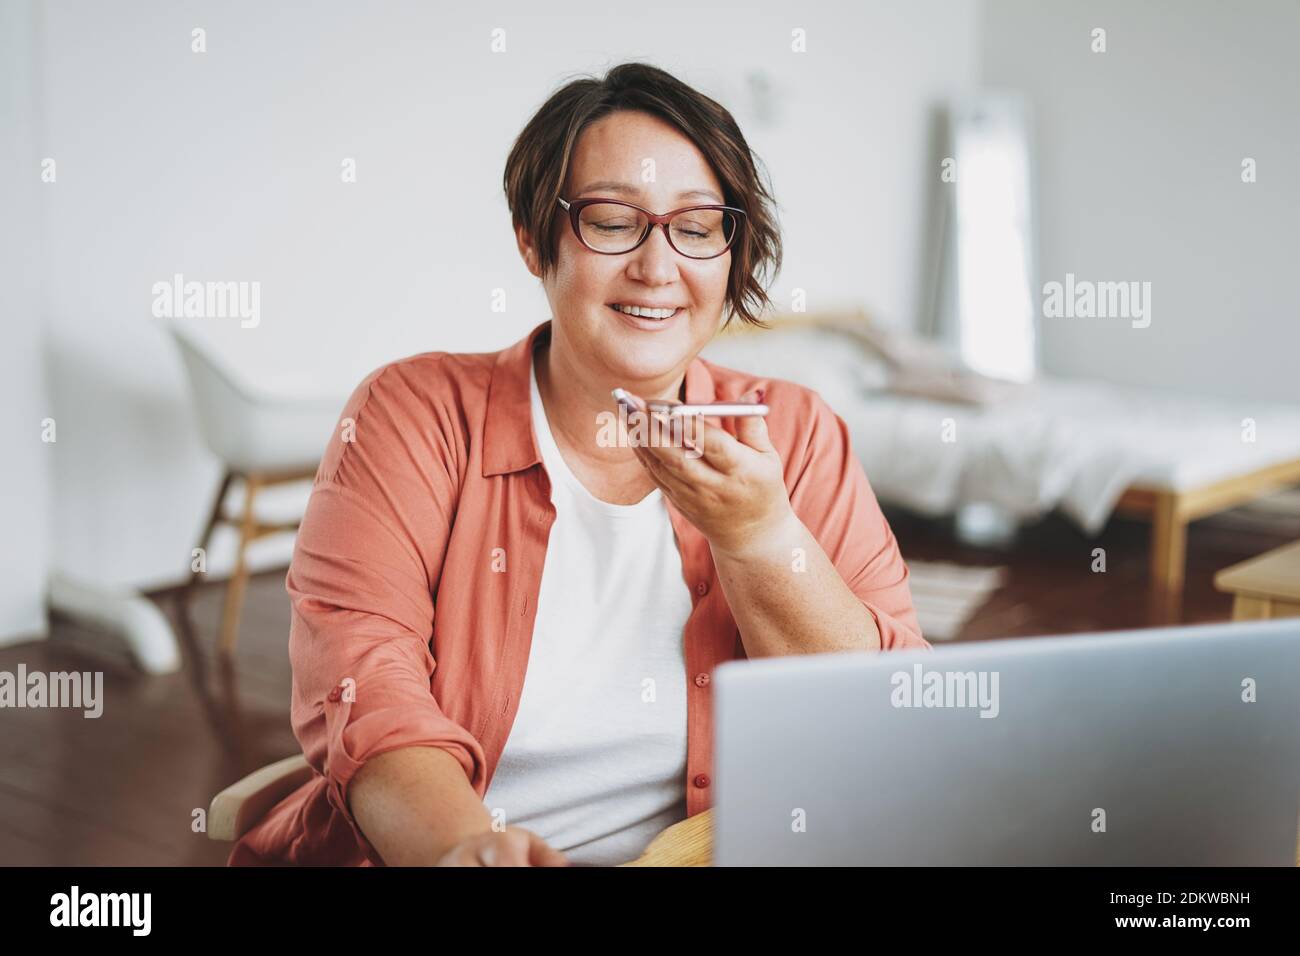 Plus Size Girl High Resolution Stock Photography and Images - Alamy